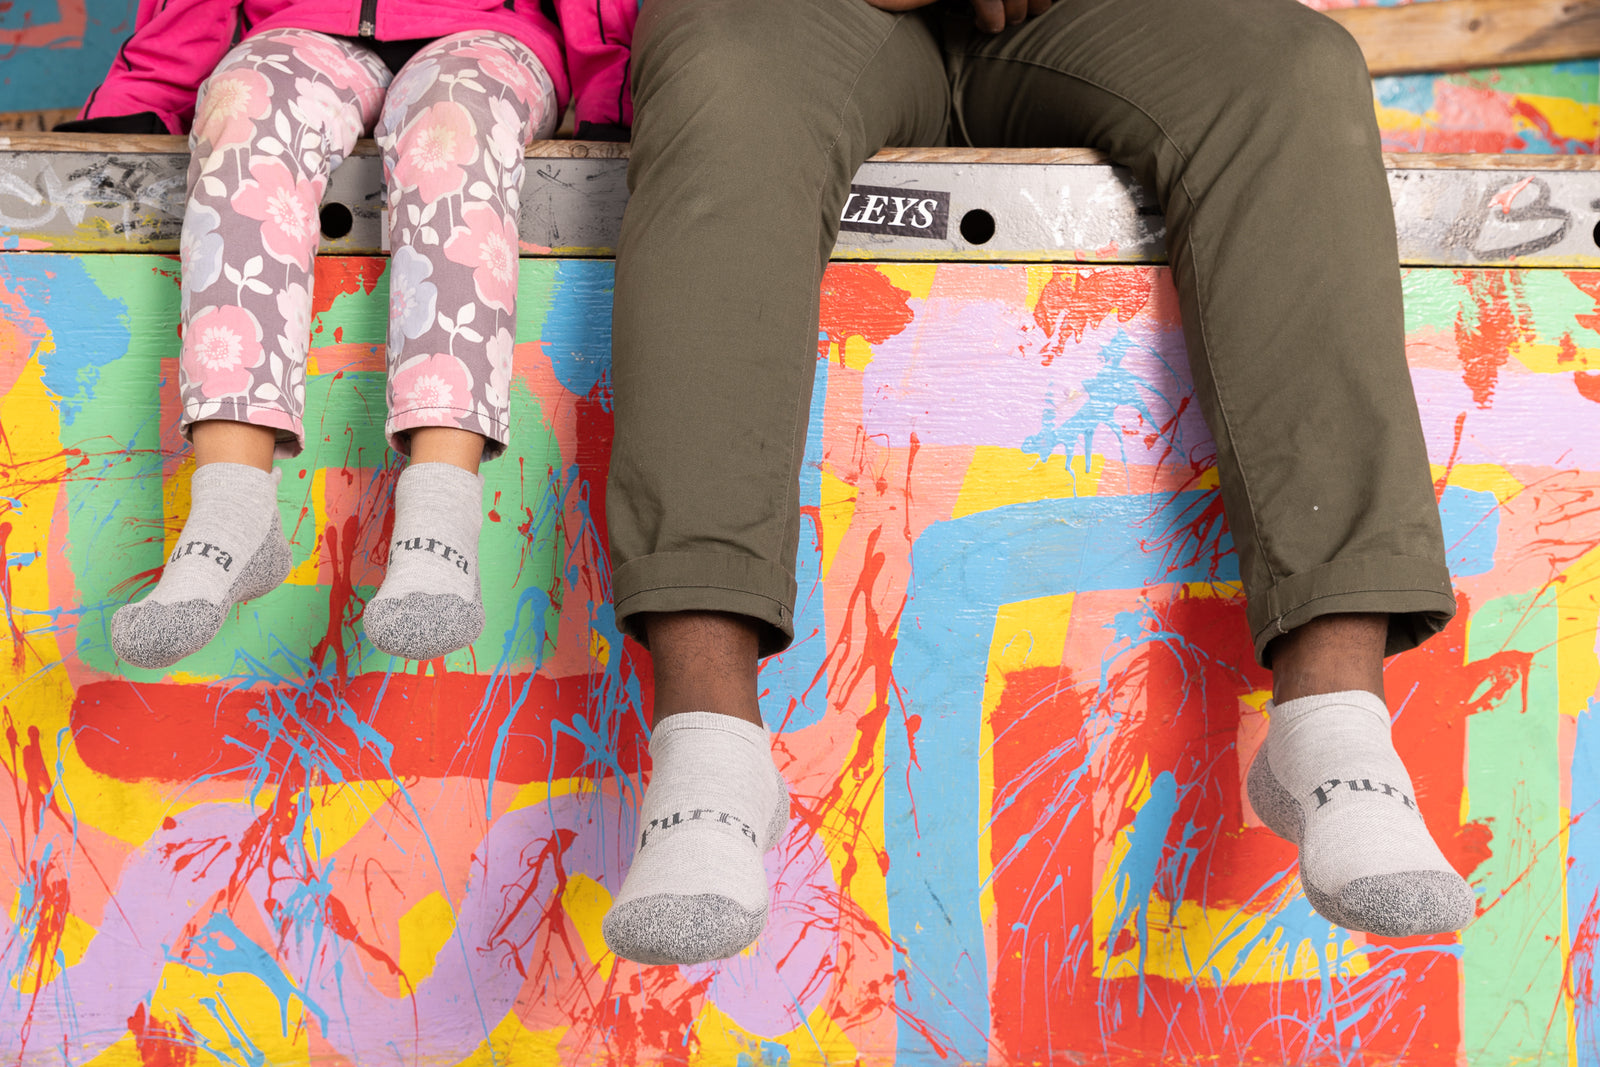 A quick rest for Dad and Daughter on a multi-colored painted concrete step.  The little girl is was wearing her Purra Light Grey No Show socks visible under her pink floral pants and the Dad is also wearing his antimicrobial Light Grey Purra No Show Socks.